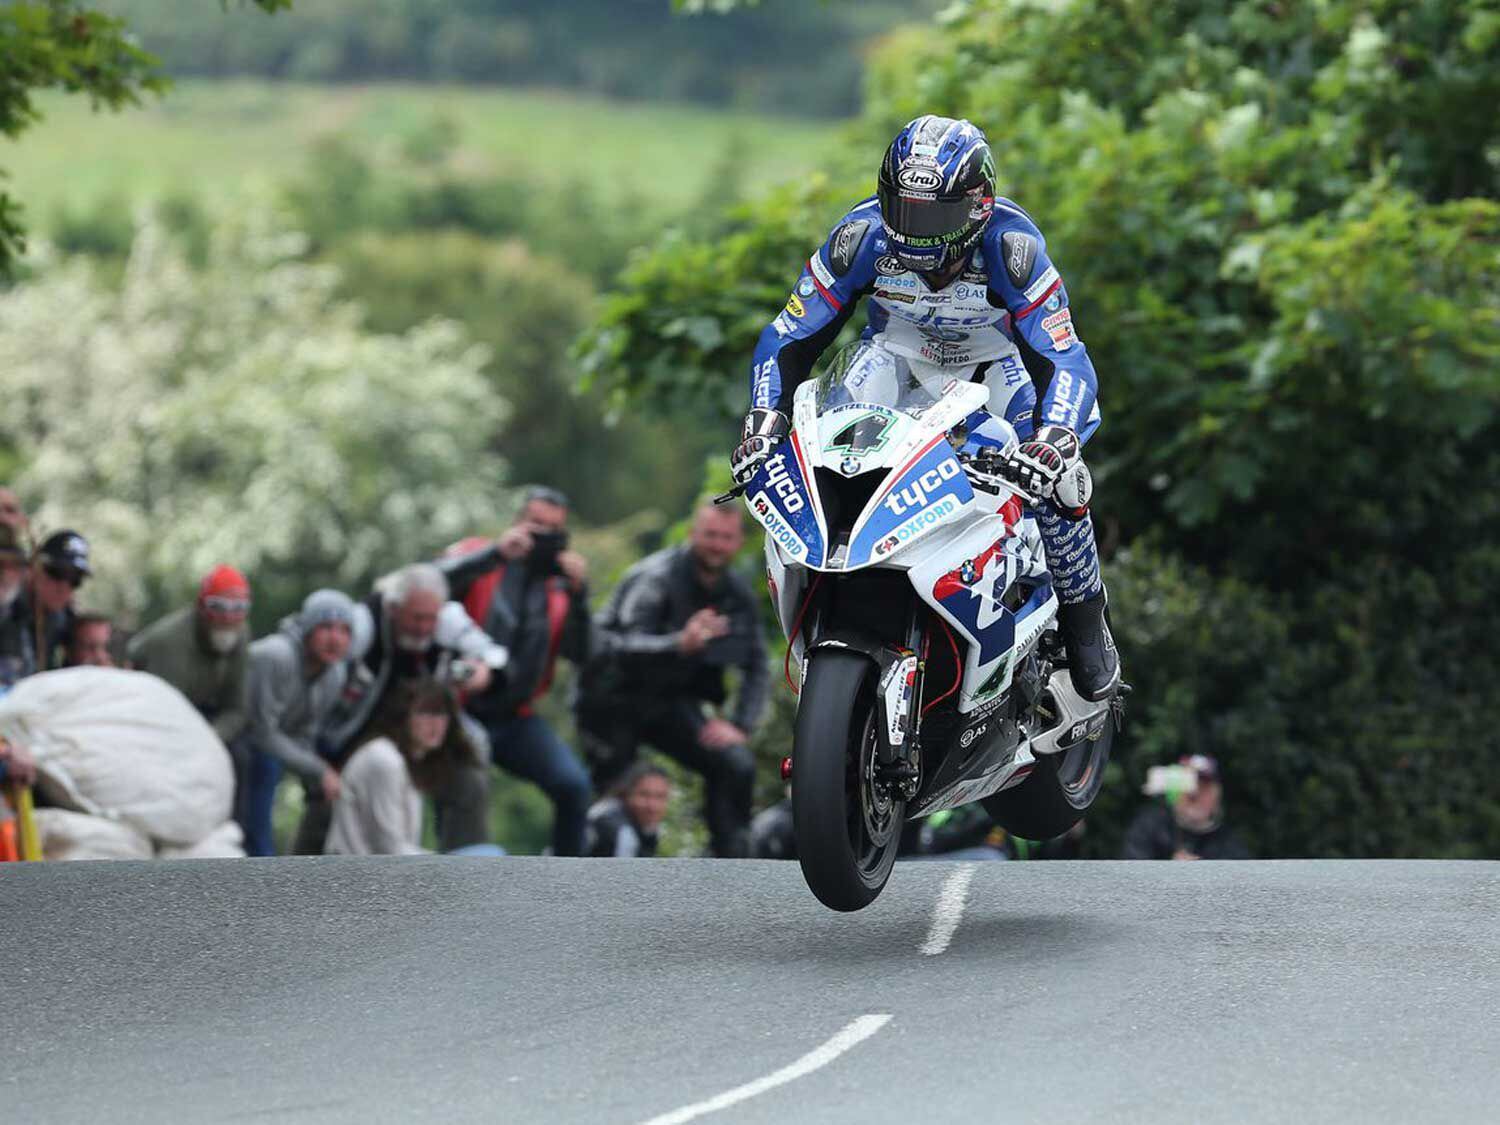 The historic Isle of Man TT is cancelled this year due to the coronavirus outbreak.